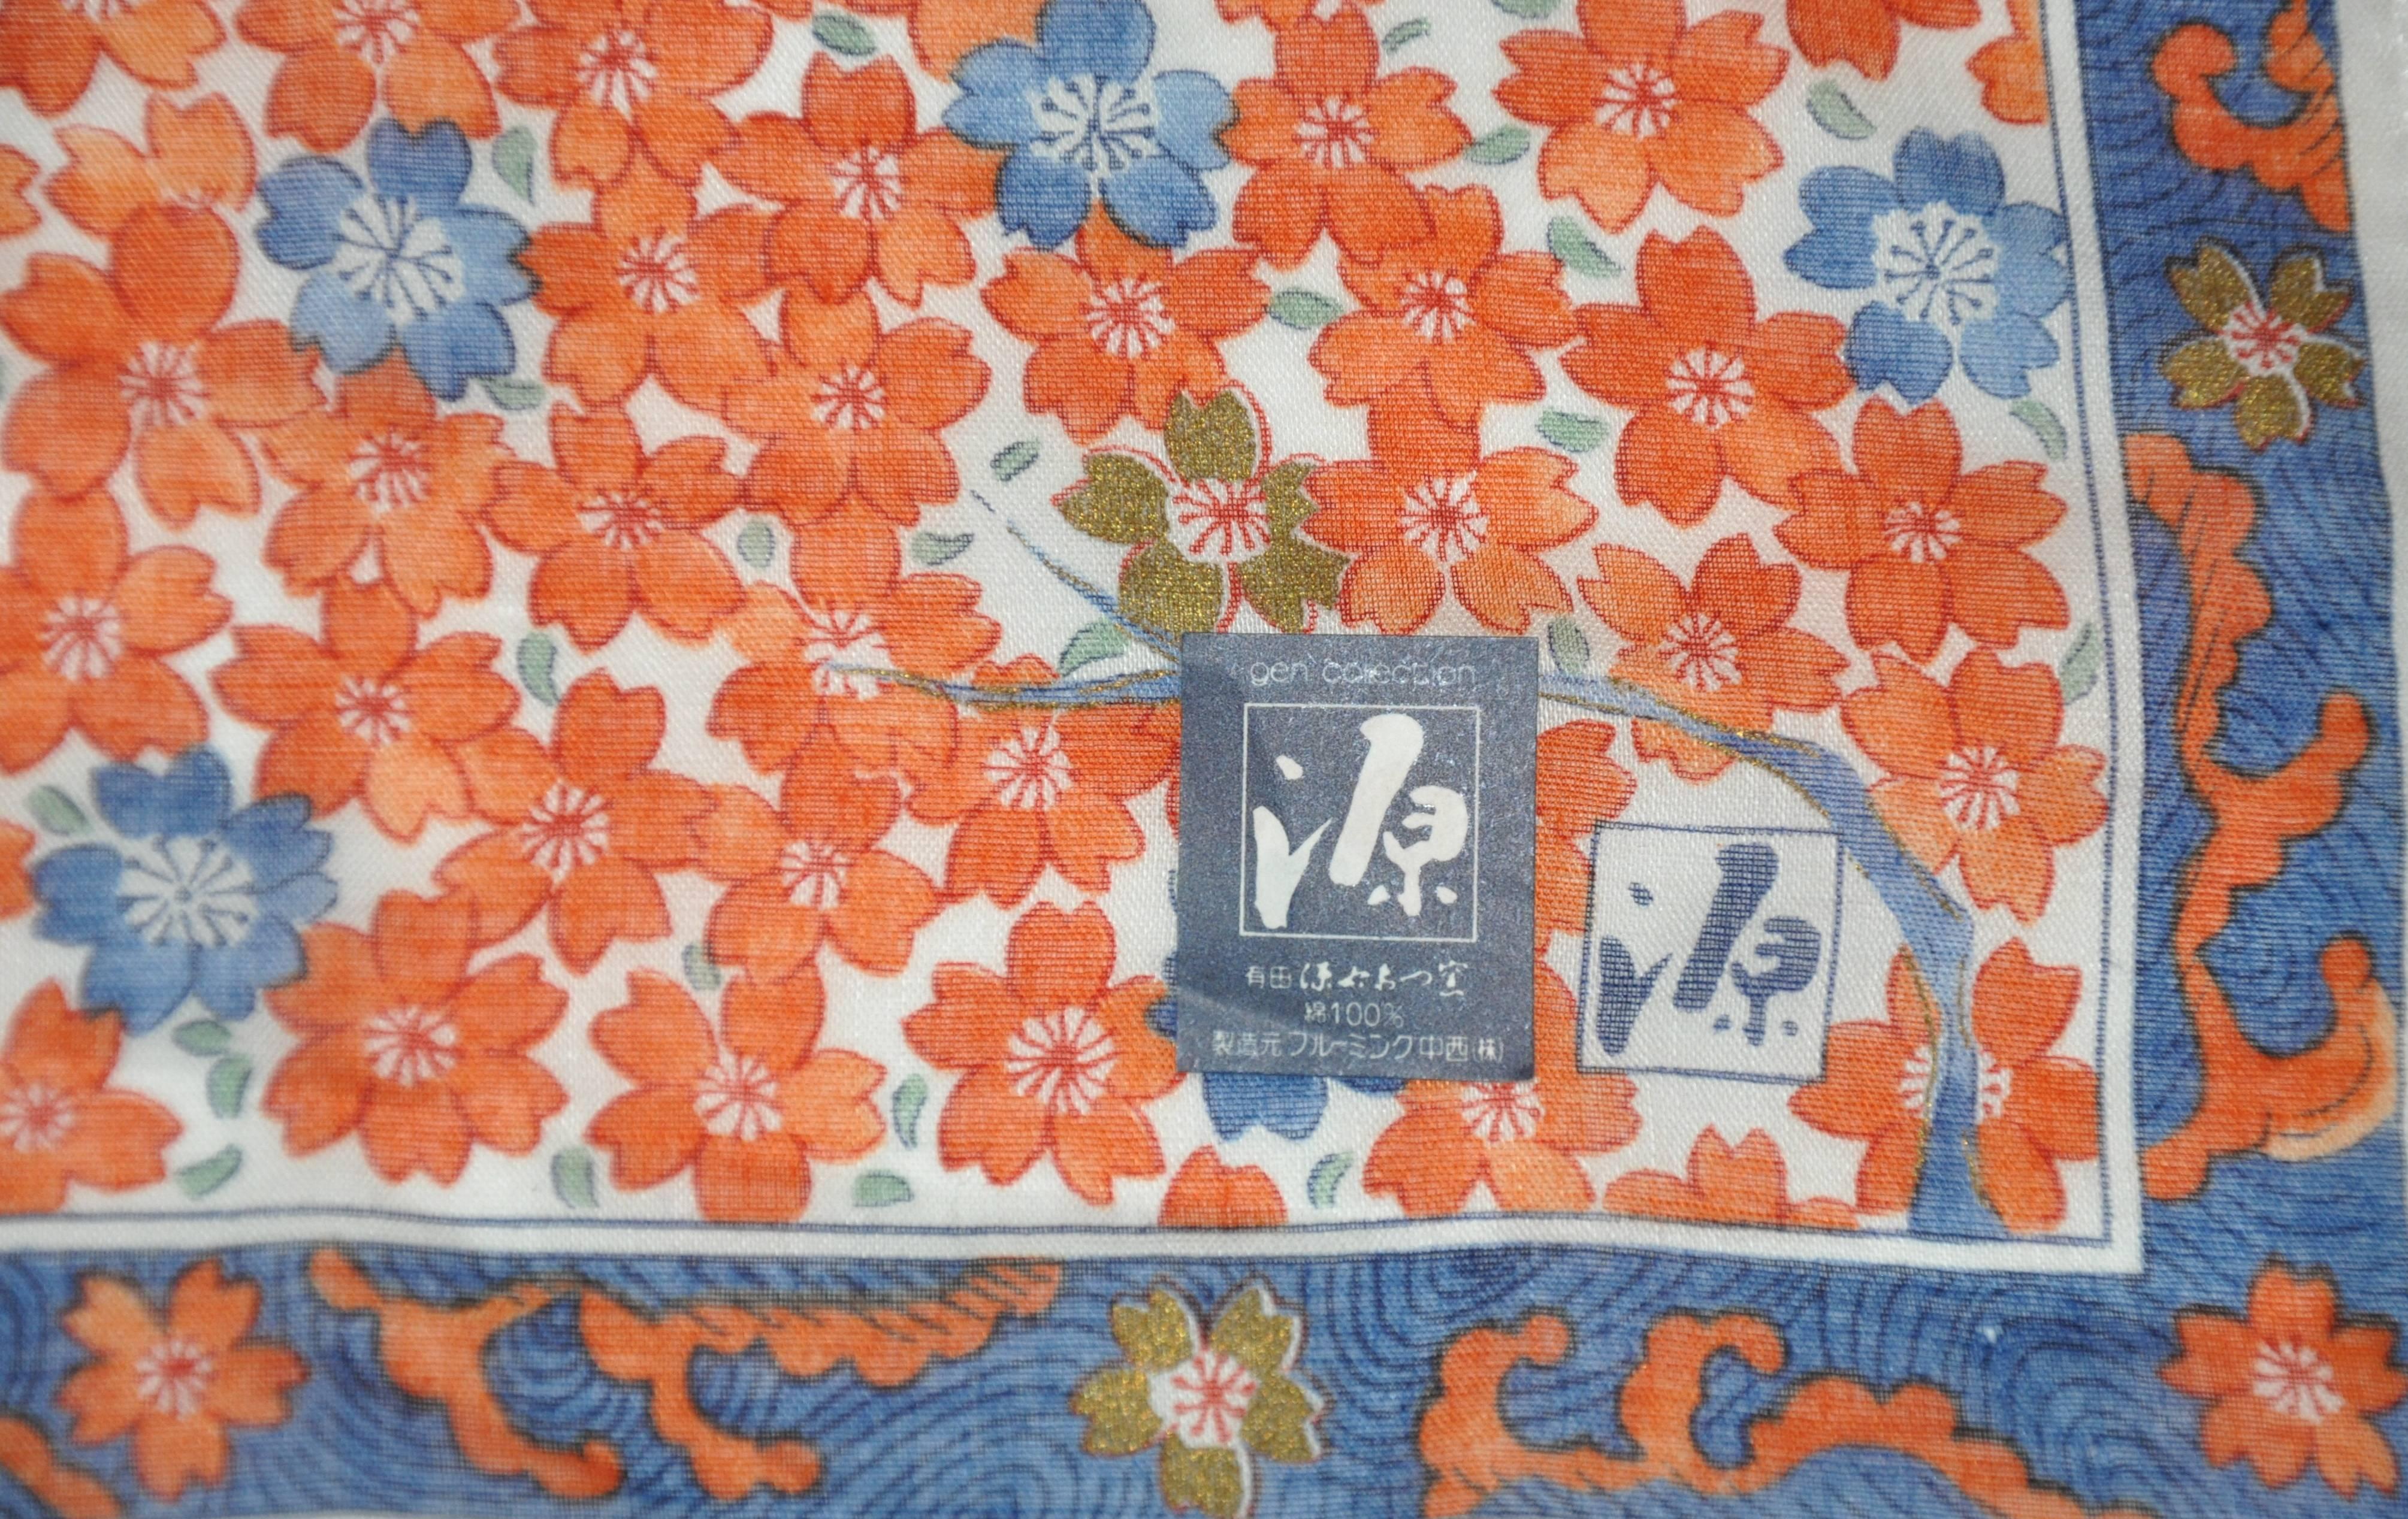        This wonderfully delicate Japanese multi rose and navy floral cotton scarf accented with rolled edges, measures 19 inches by 19 inches. Original sticker attached near corner. Made in Japan.